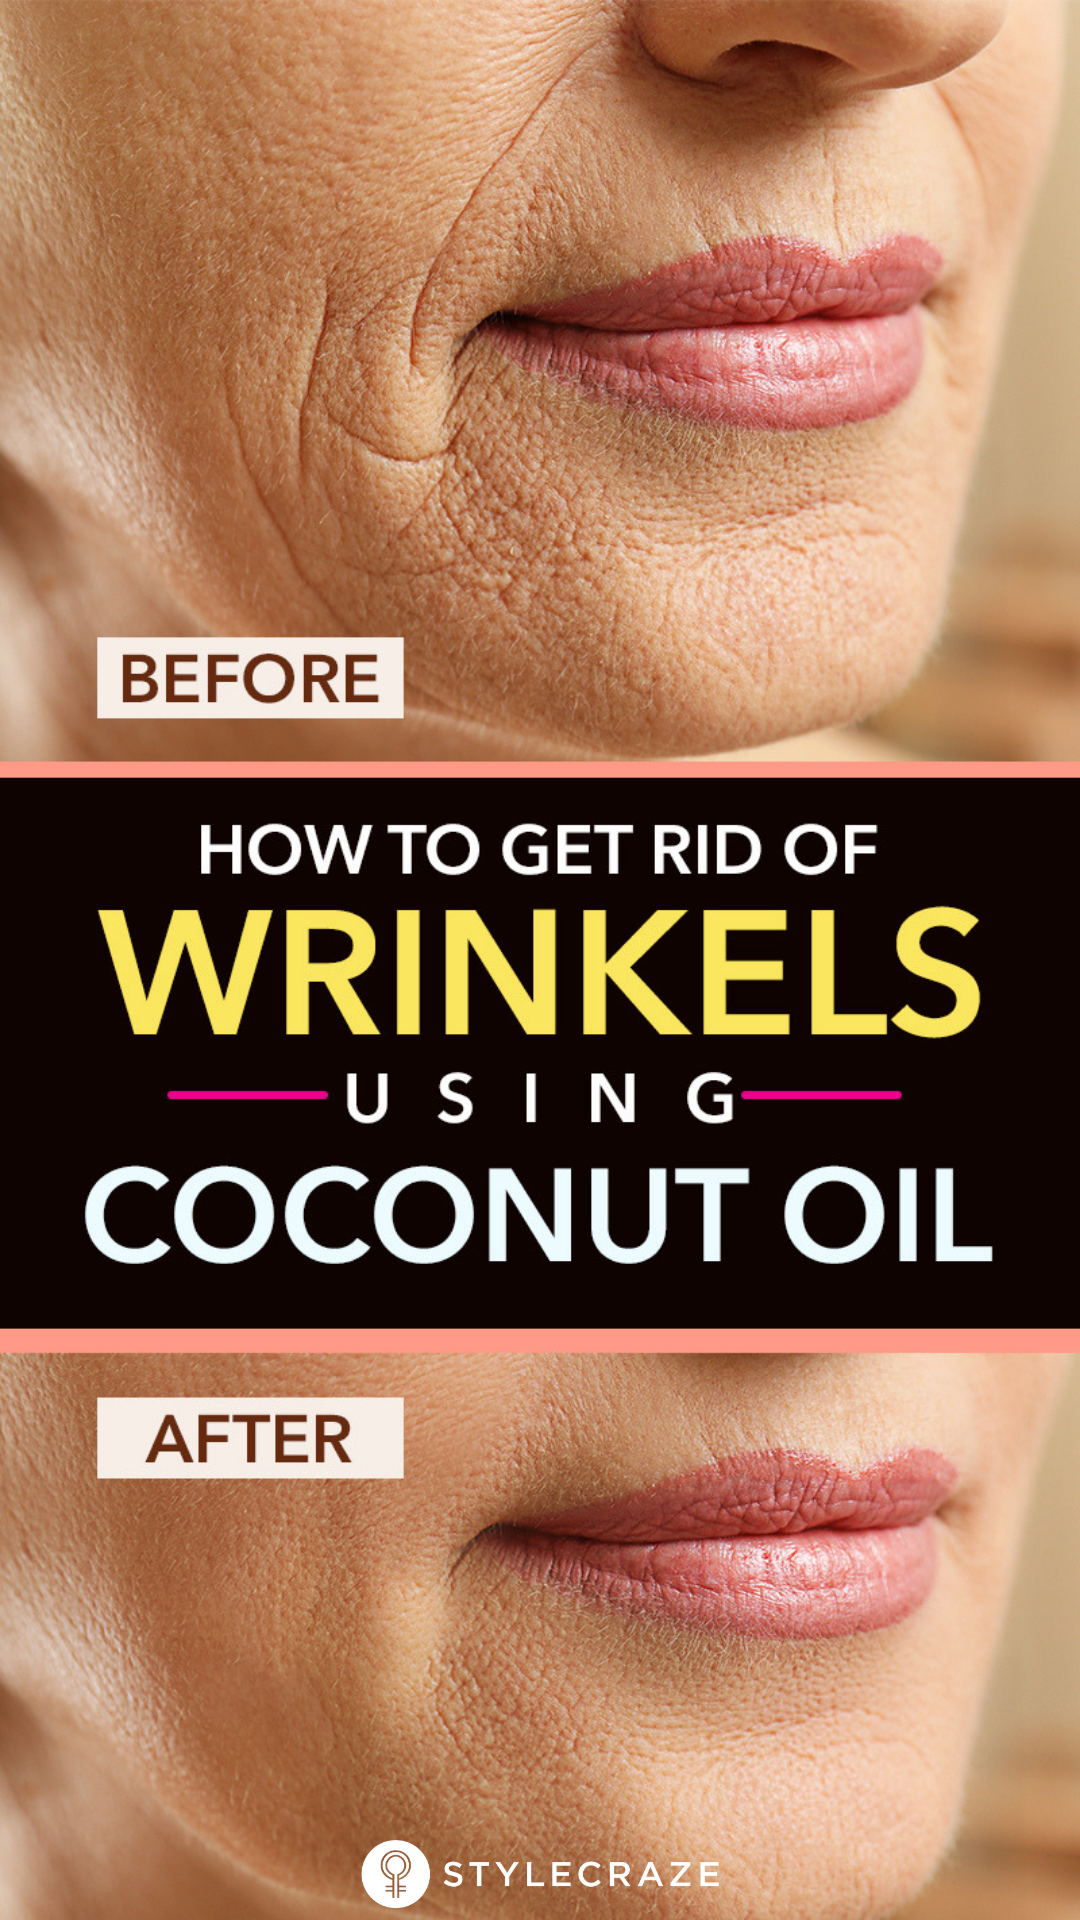 15 skin care For Wrinkles products ideas